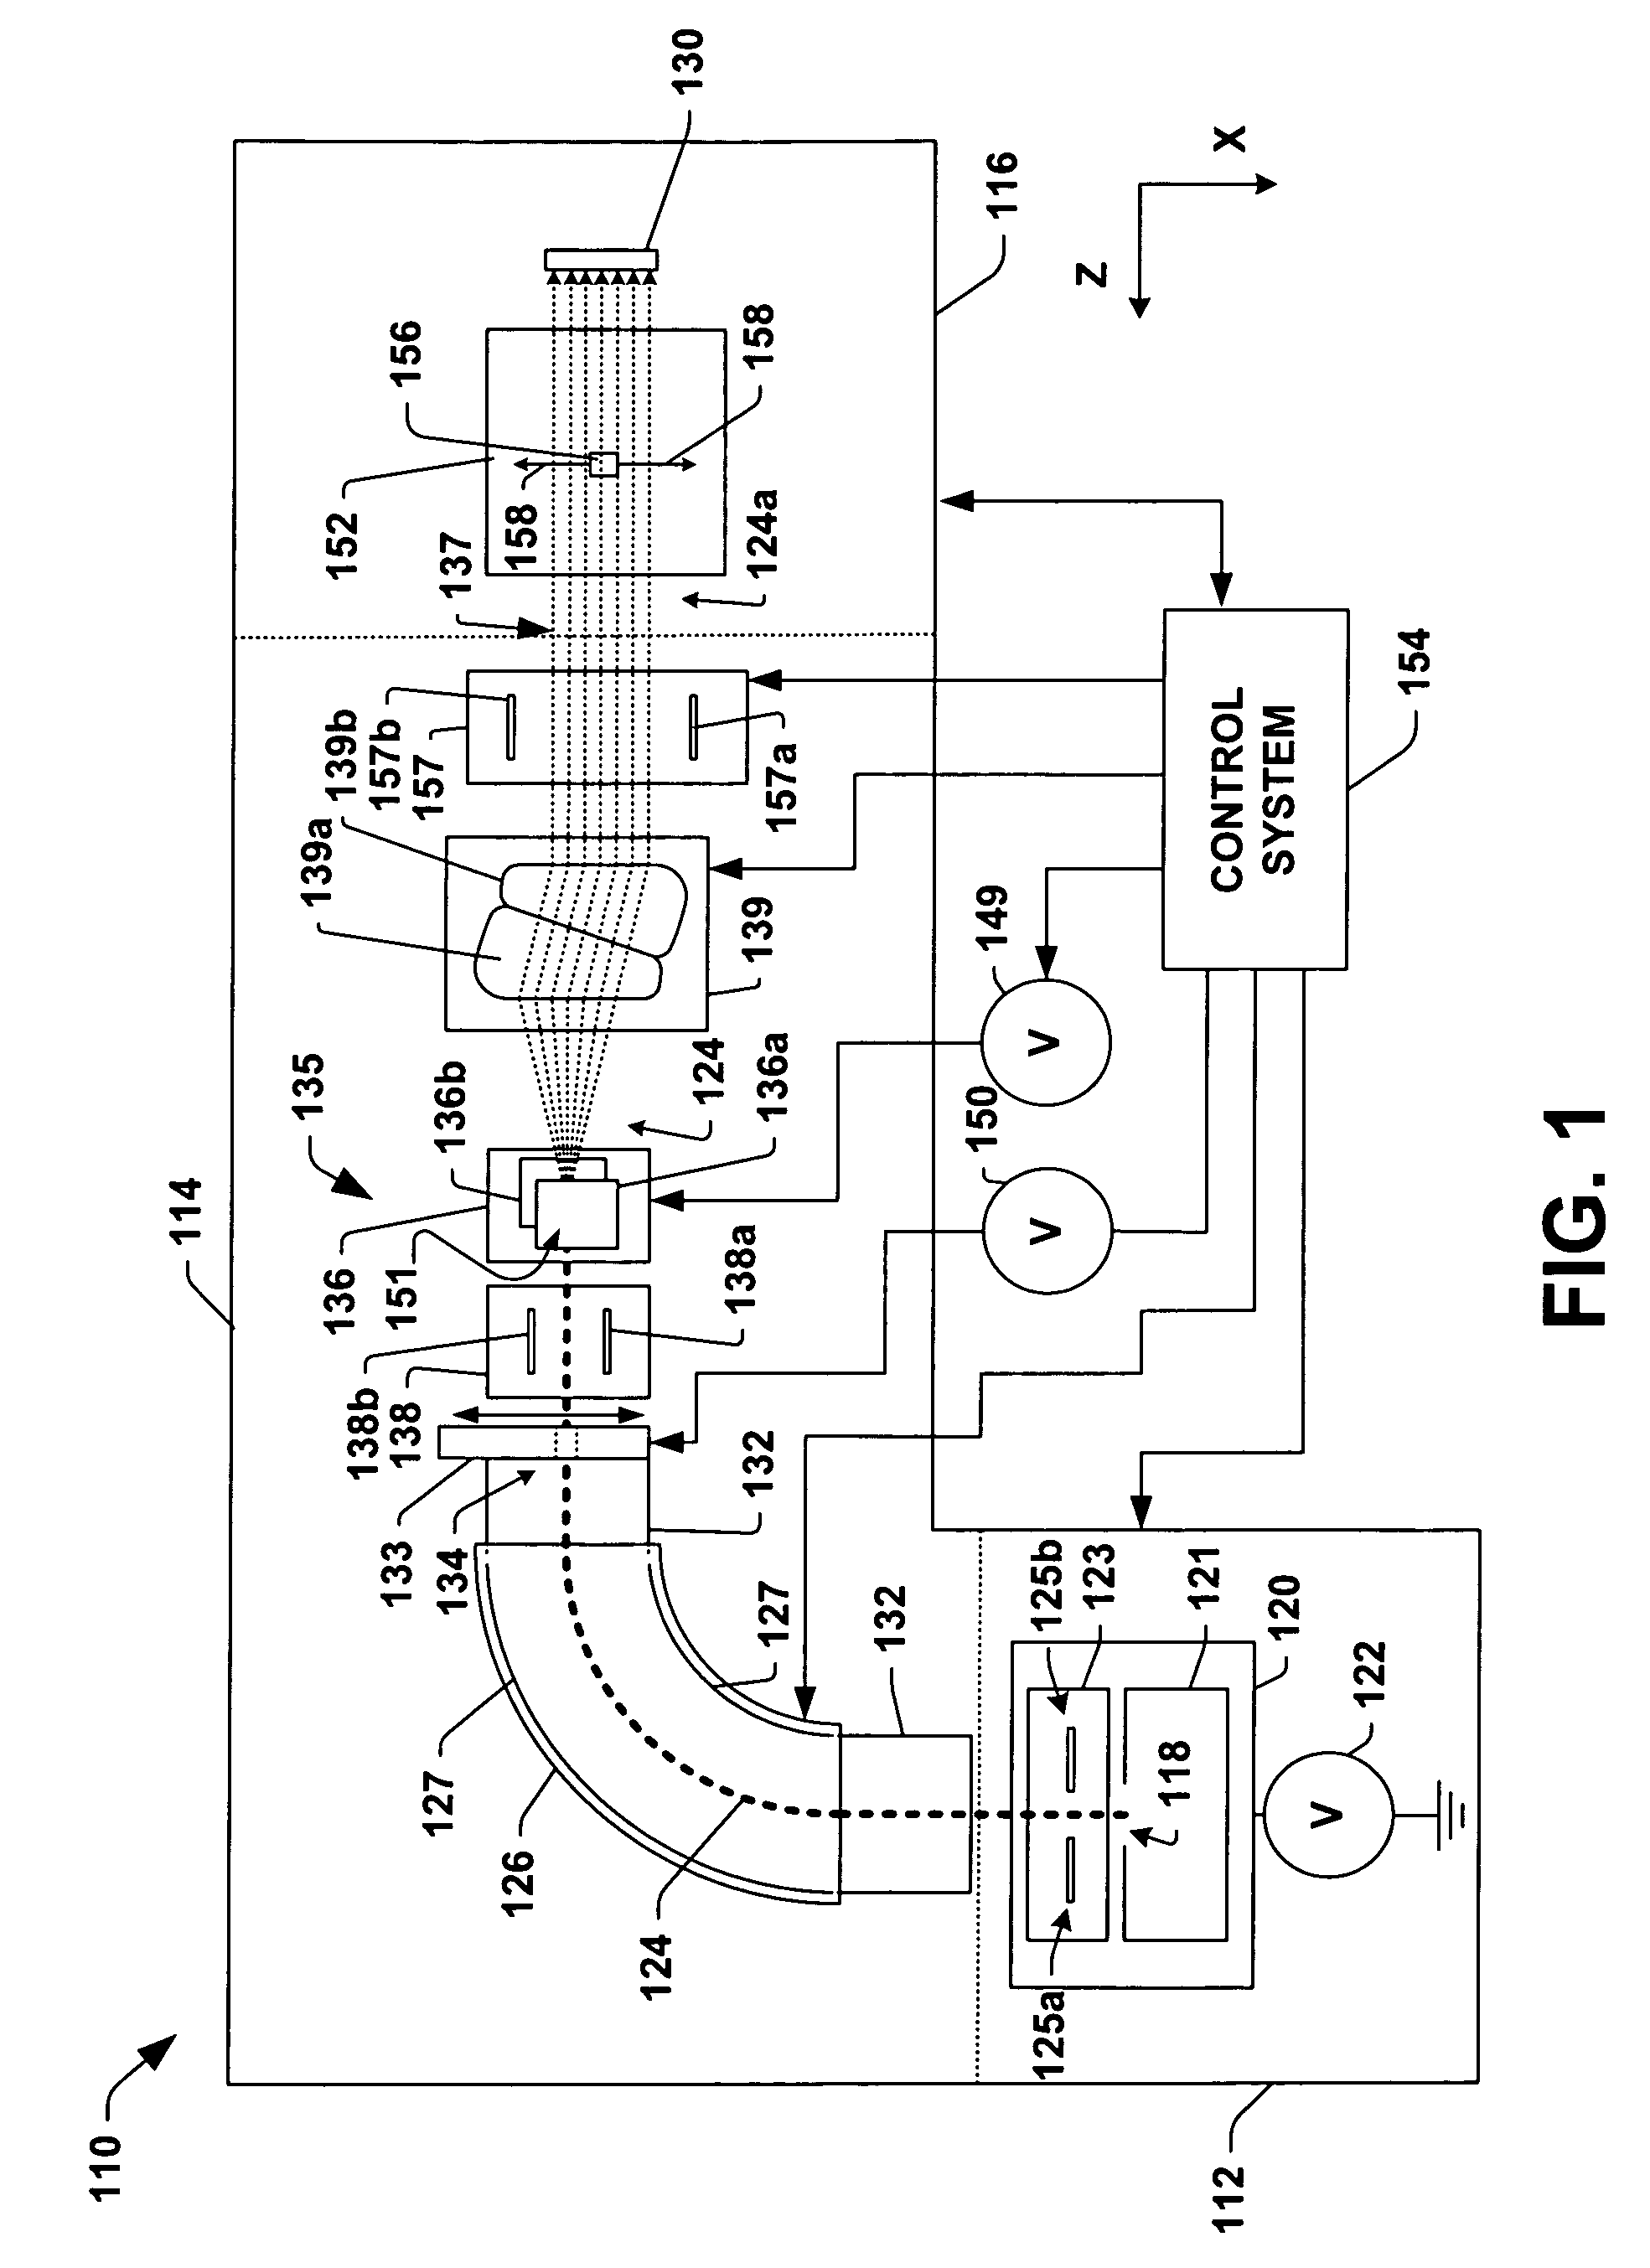 Systems and methods for beam angle adjustment in ion implanters